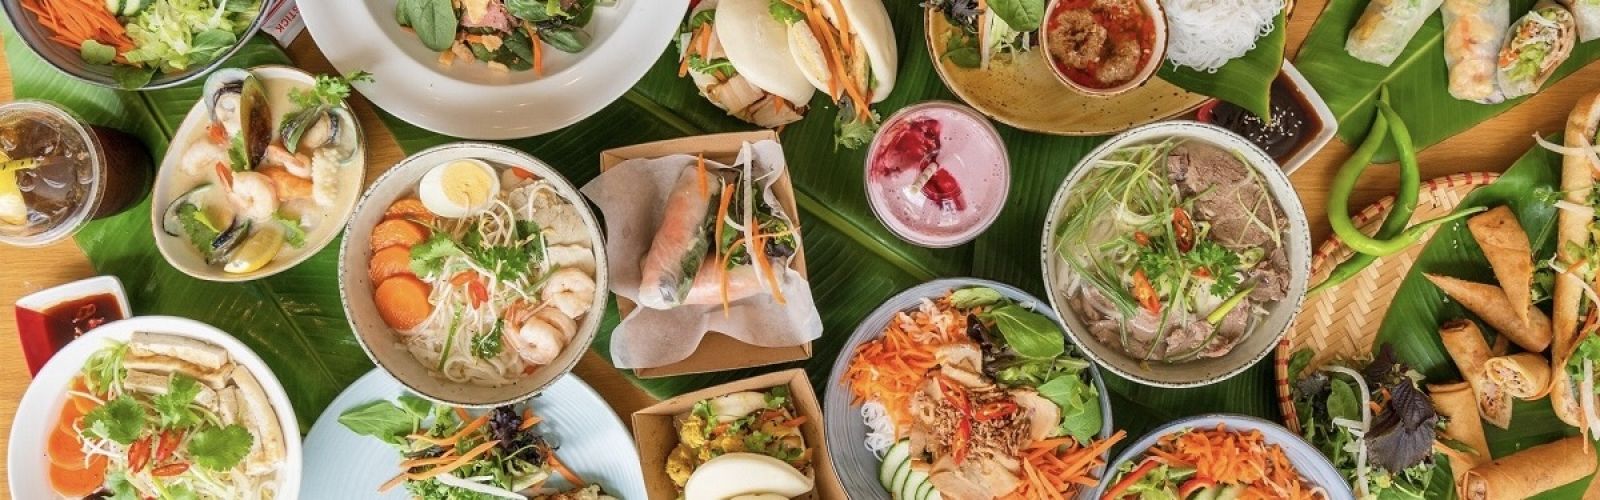 What To Eat in Vietnam